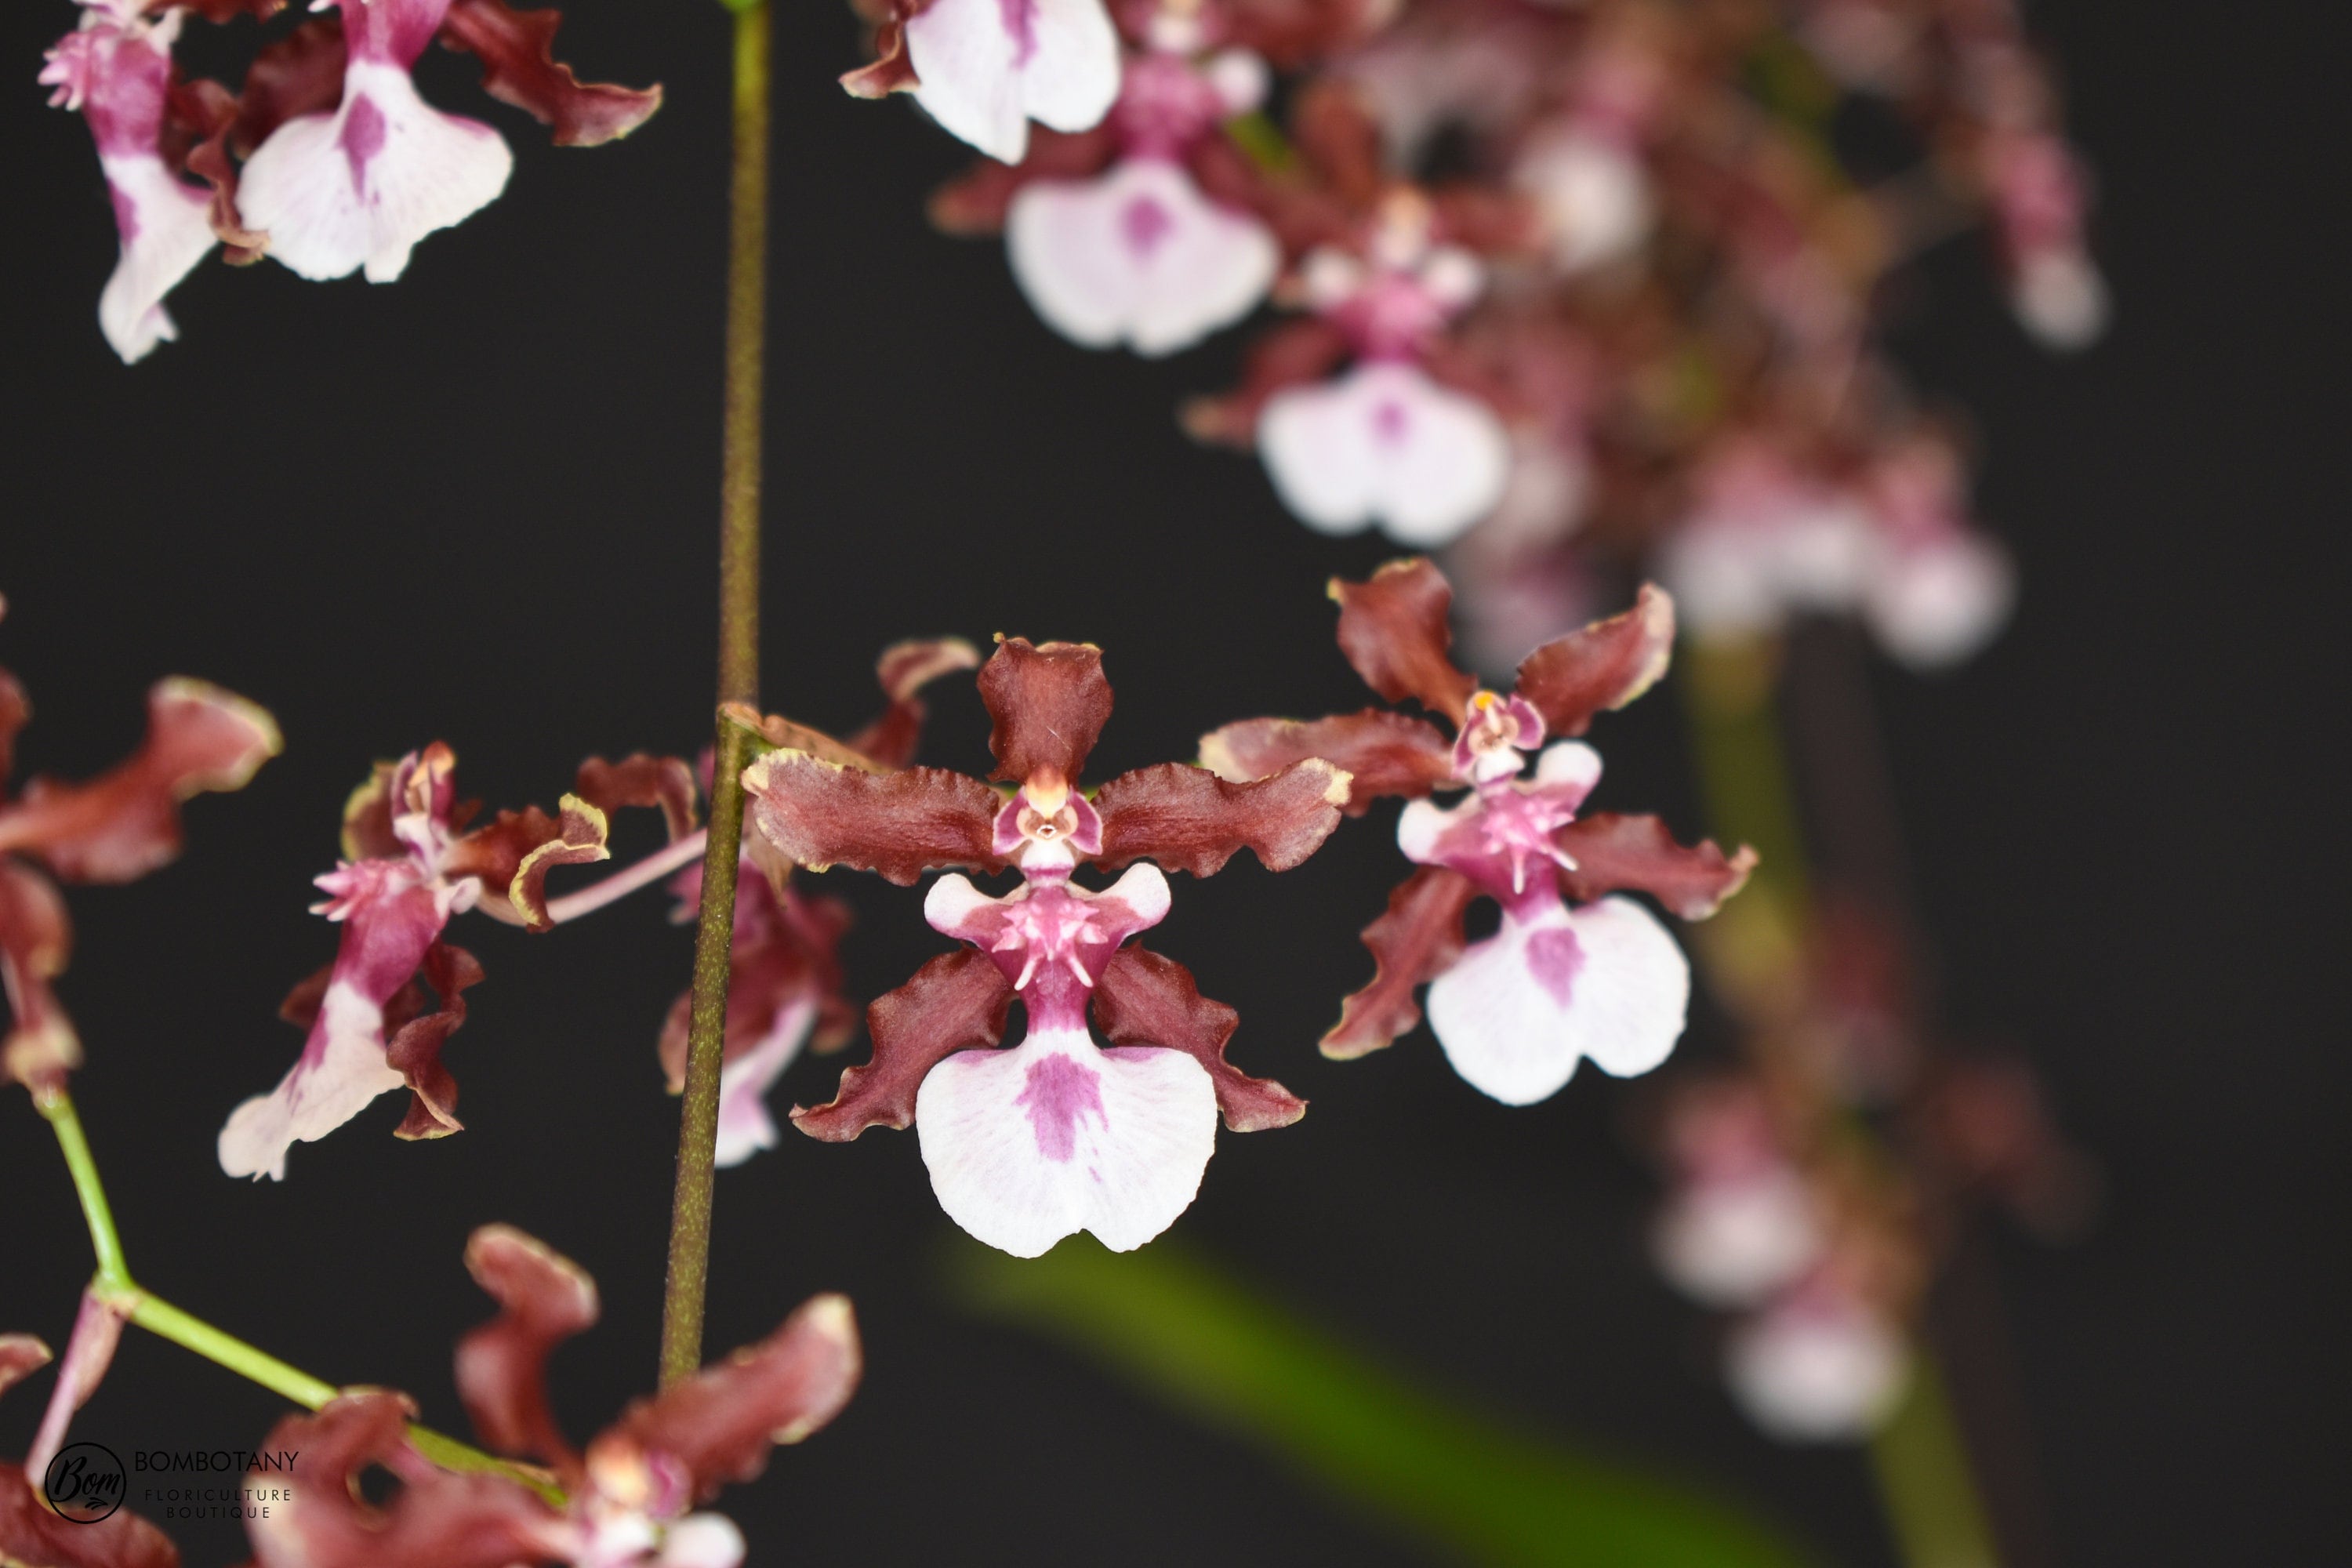 Fragrant Chocolate Oncidium Sharry Baby 'Red Fantasy' IN SPIKE